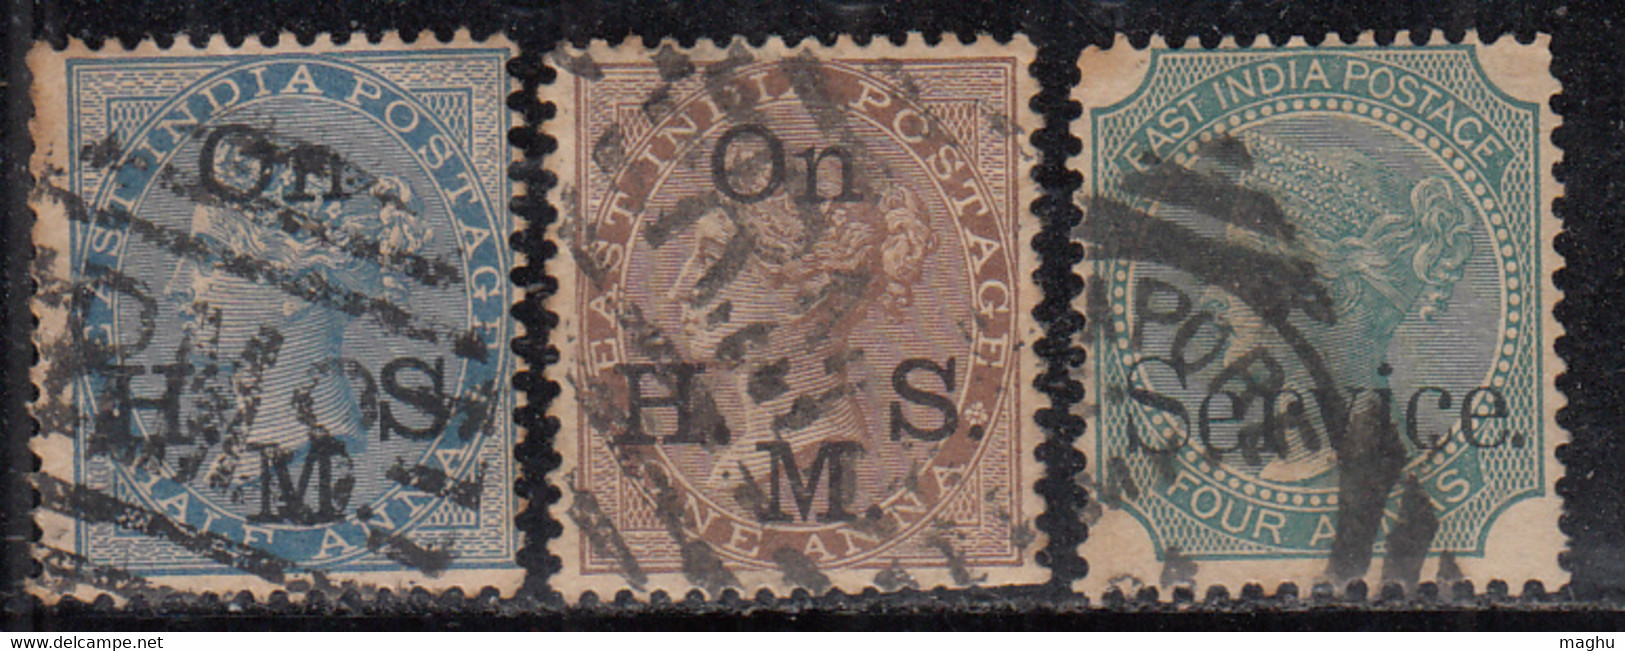 3 Values Service, British East India Used, 1867, 1874 Issue, 3v - 1858-79 Crown Colony